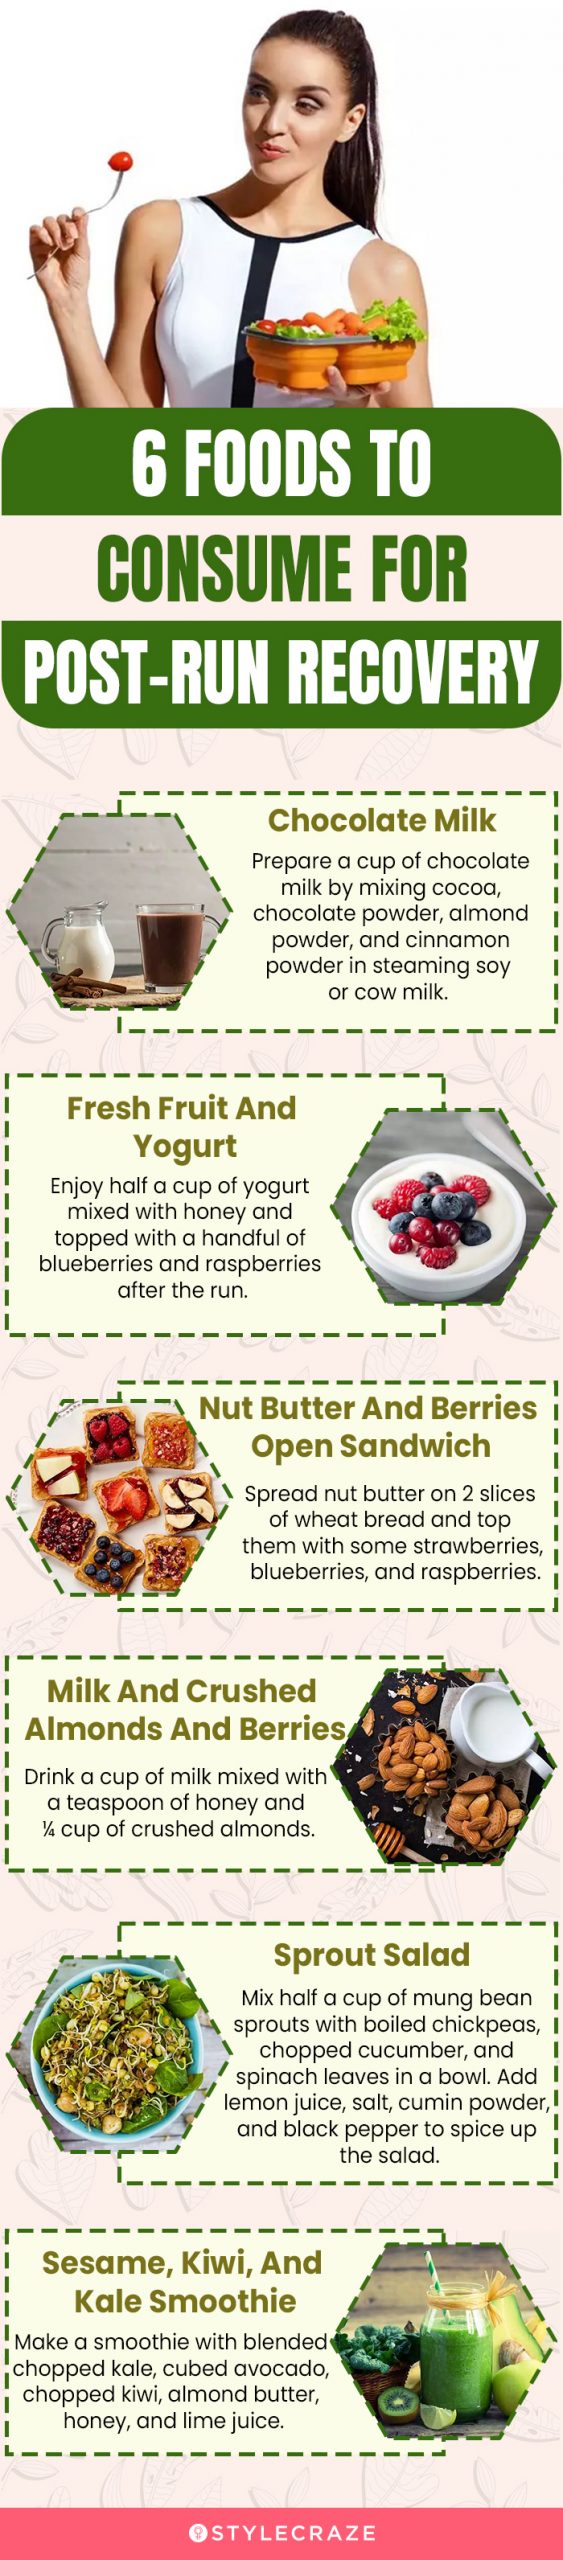 6 foods to consume for postrun recovery (infographic)